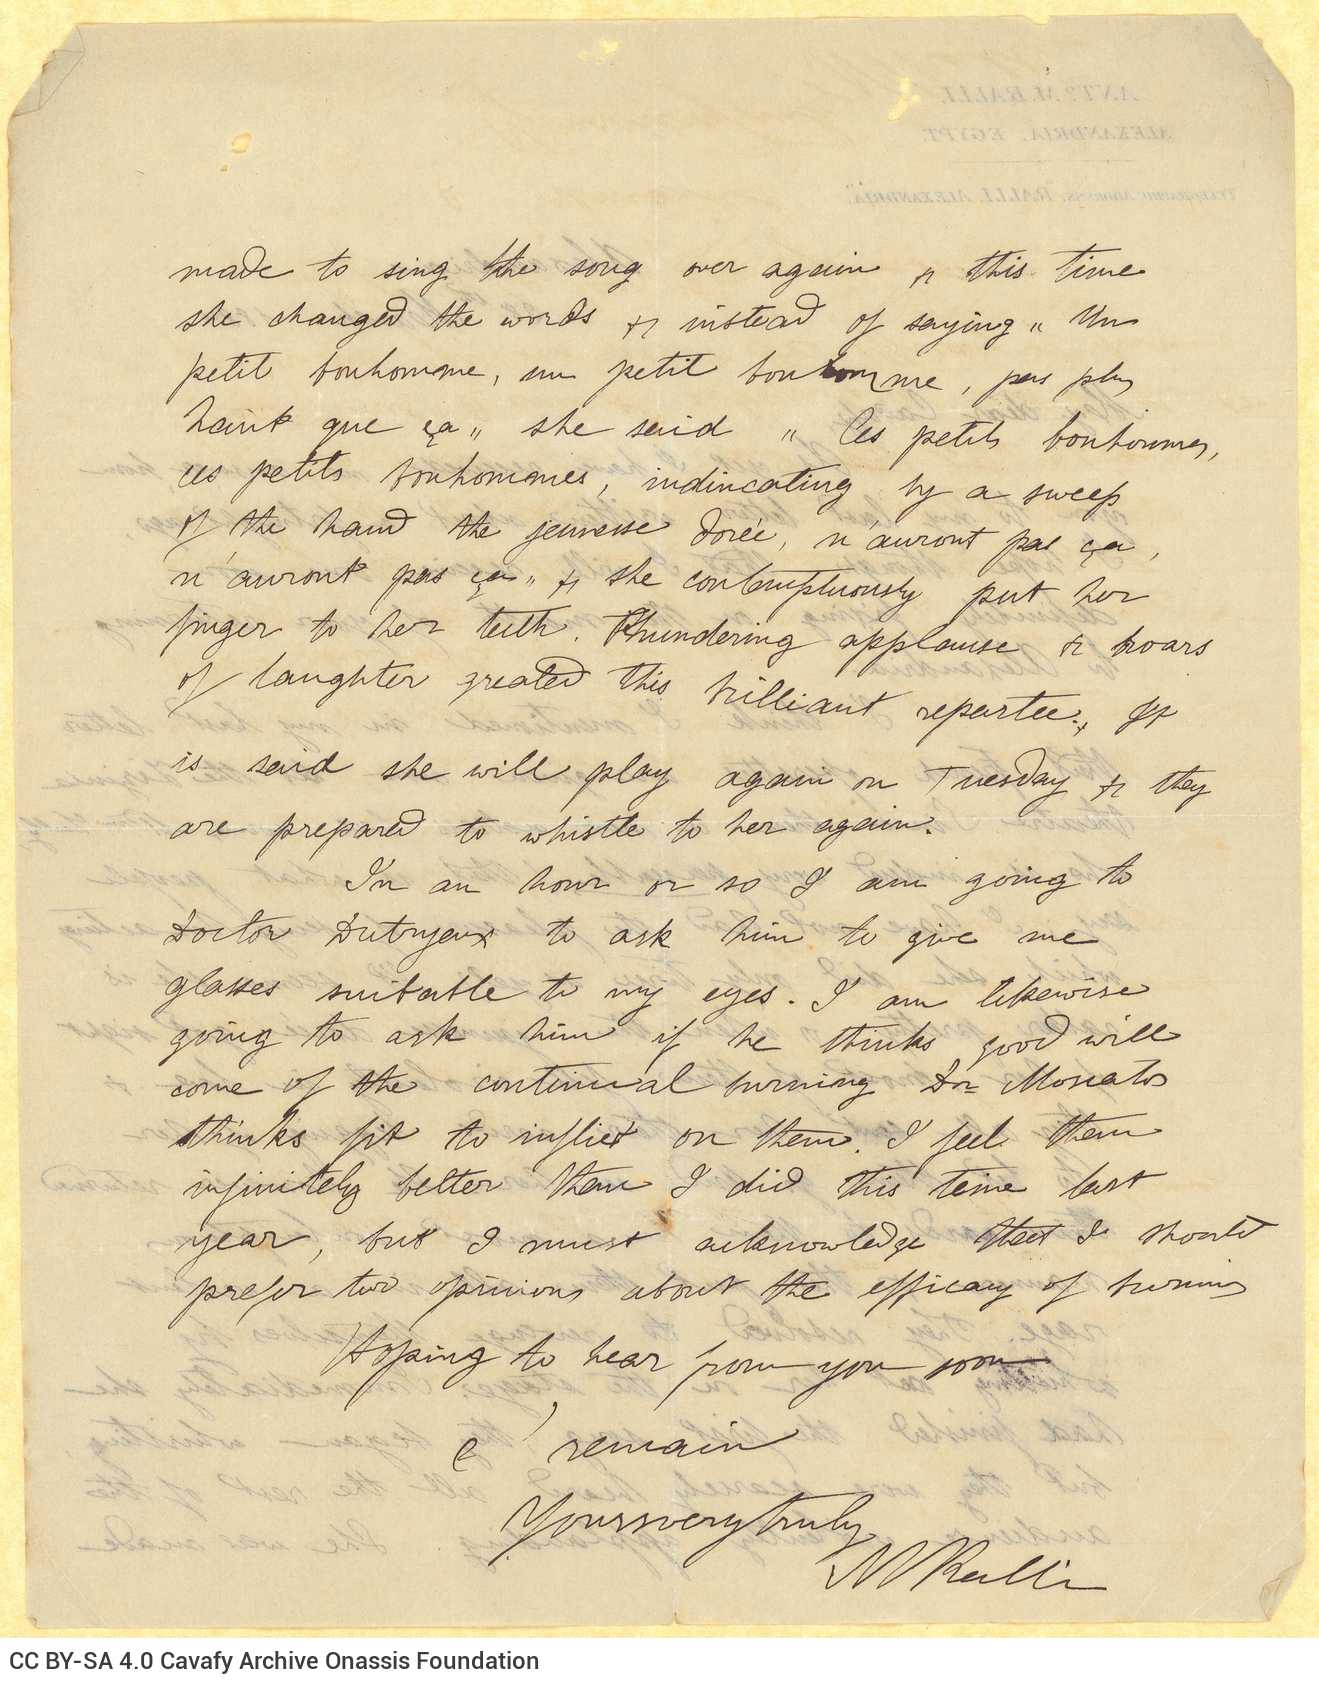 Handwritten letter by Mike Ralli to Cavafy on both sides of a sheet. Commentary on the spectacles available at the Zizinia th